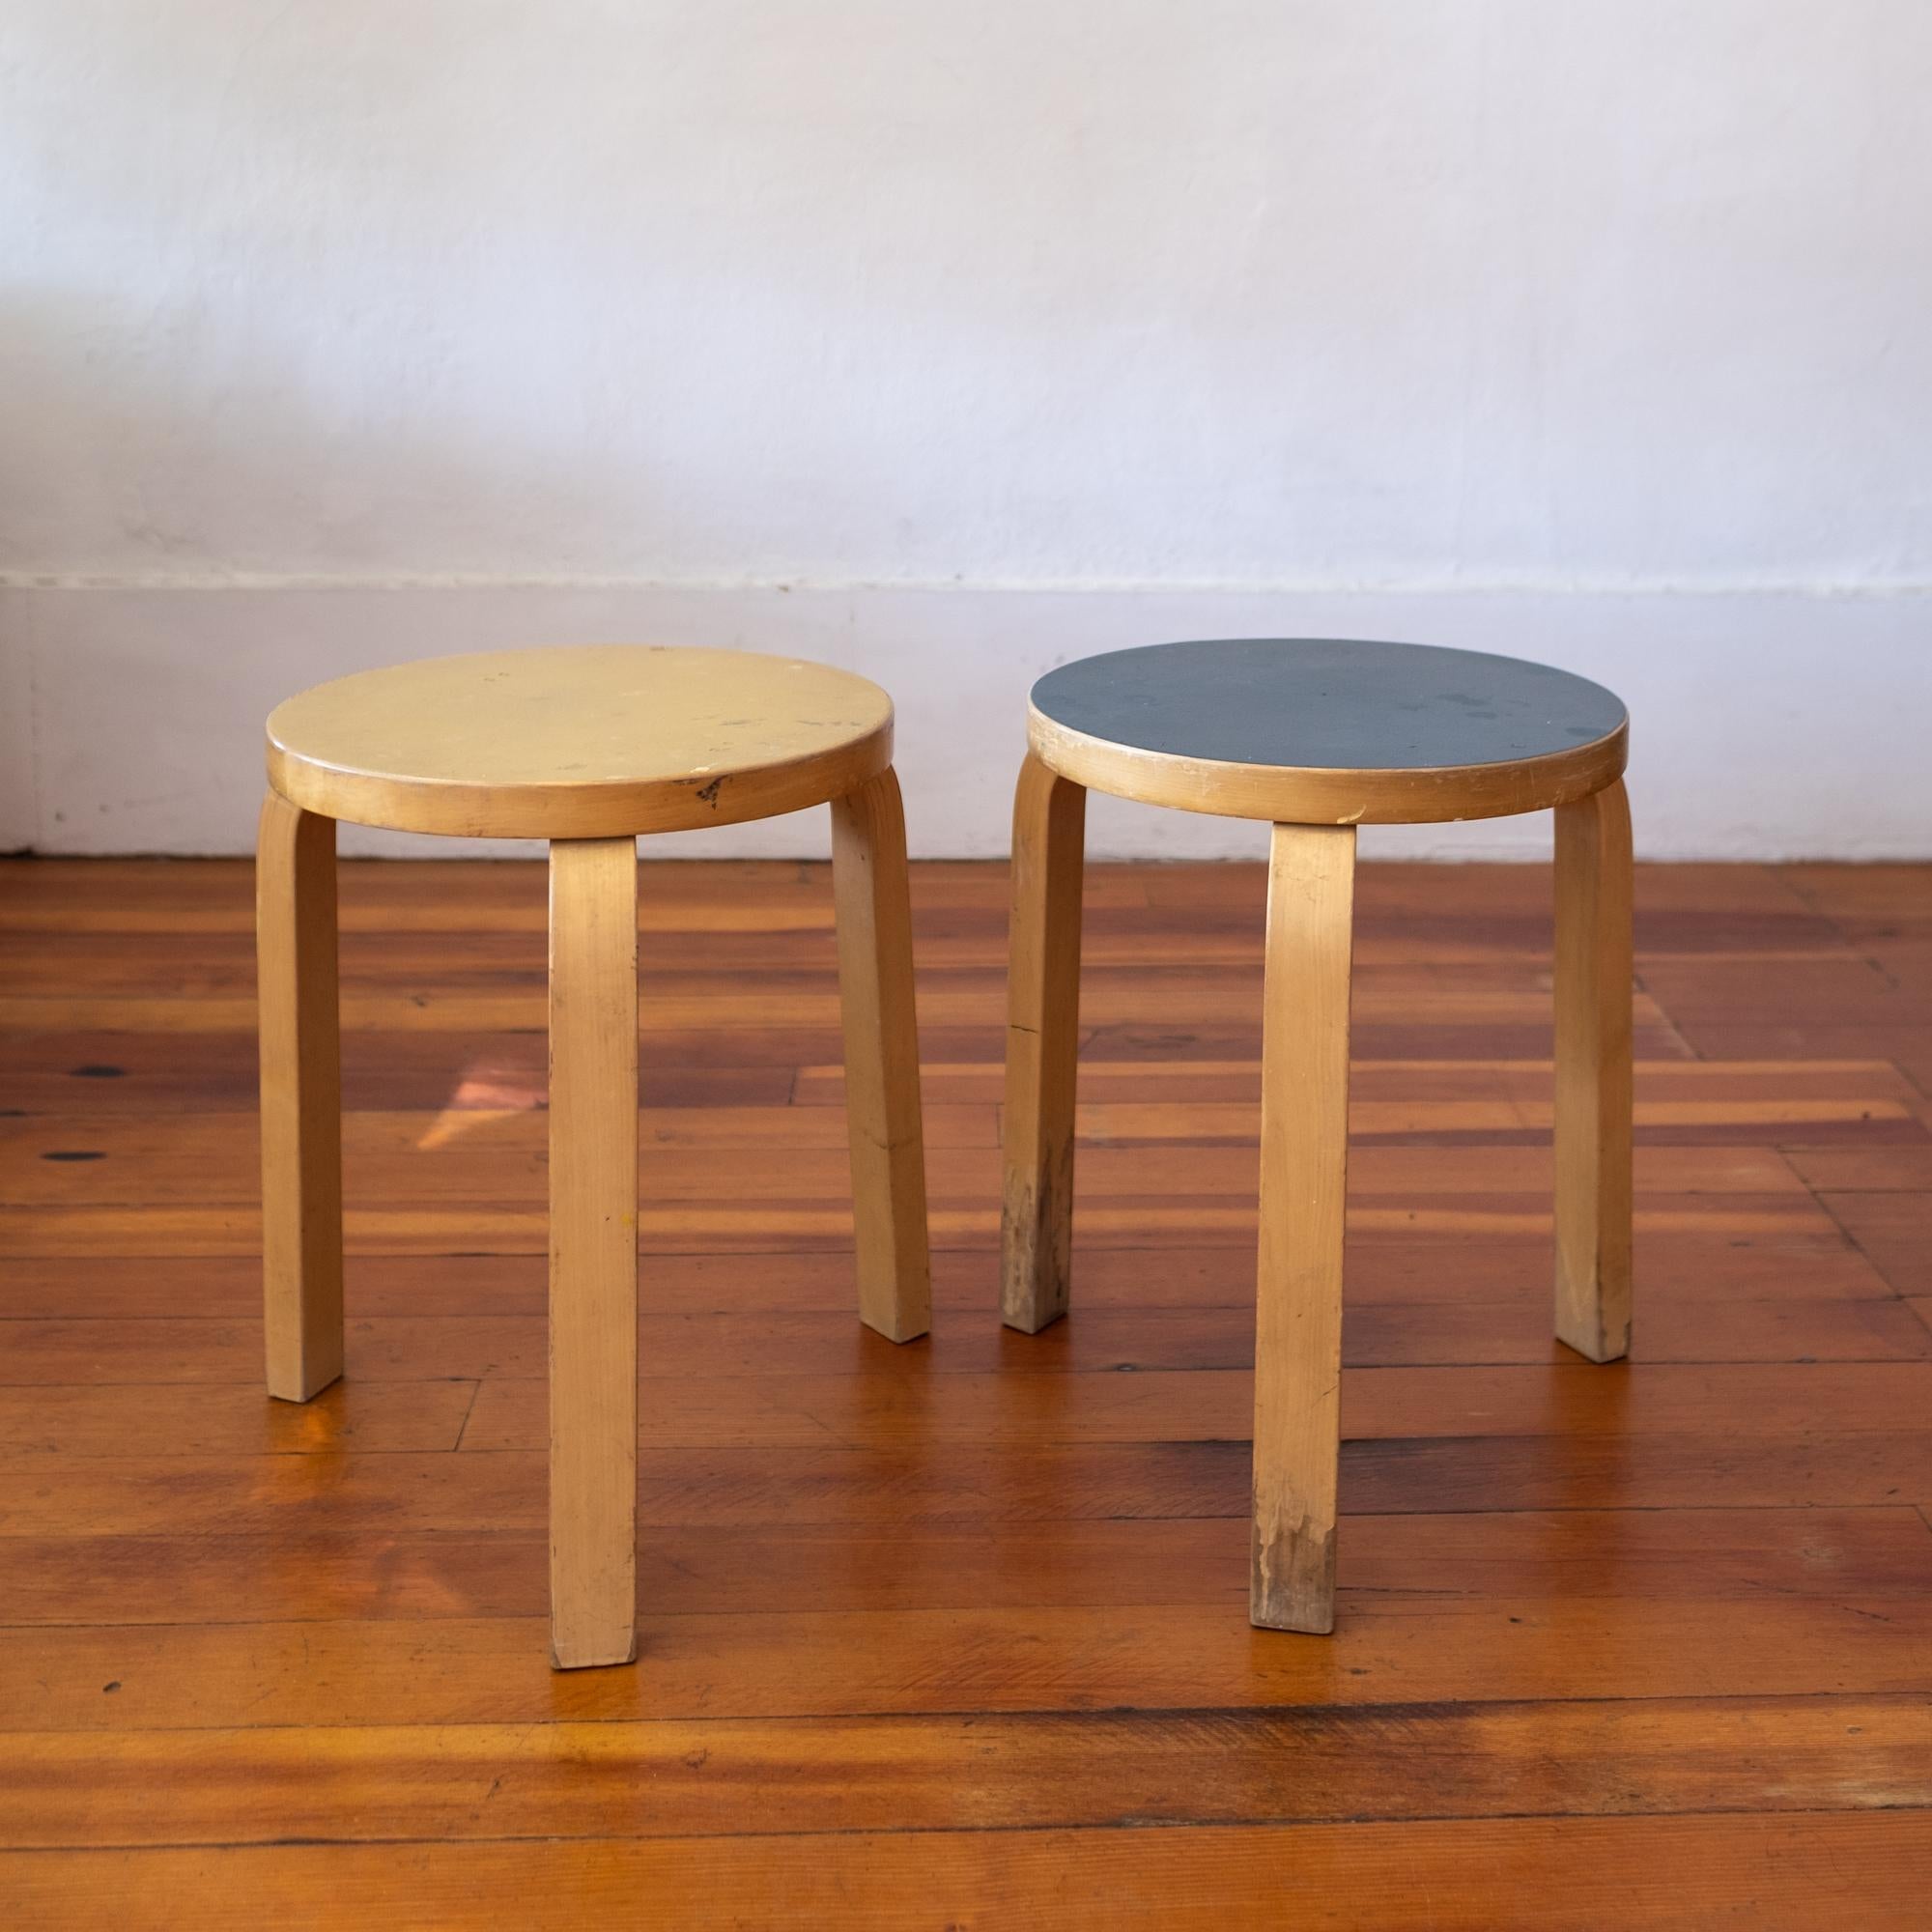 A pair of vintage Alvar Aalto model 60 linoleum top stools. Nicely warn yellow and blue top stools. Birch bentwood legs with Aalto’s signature feathered bentwood leg design. Great patina, 1950s.